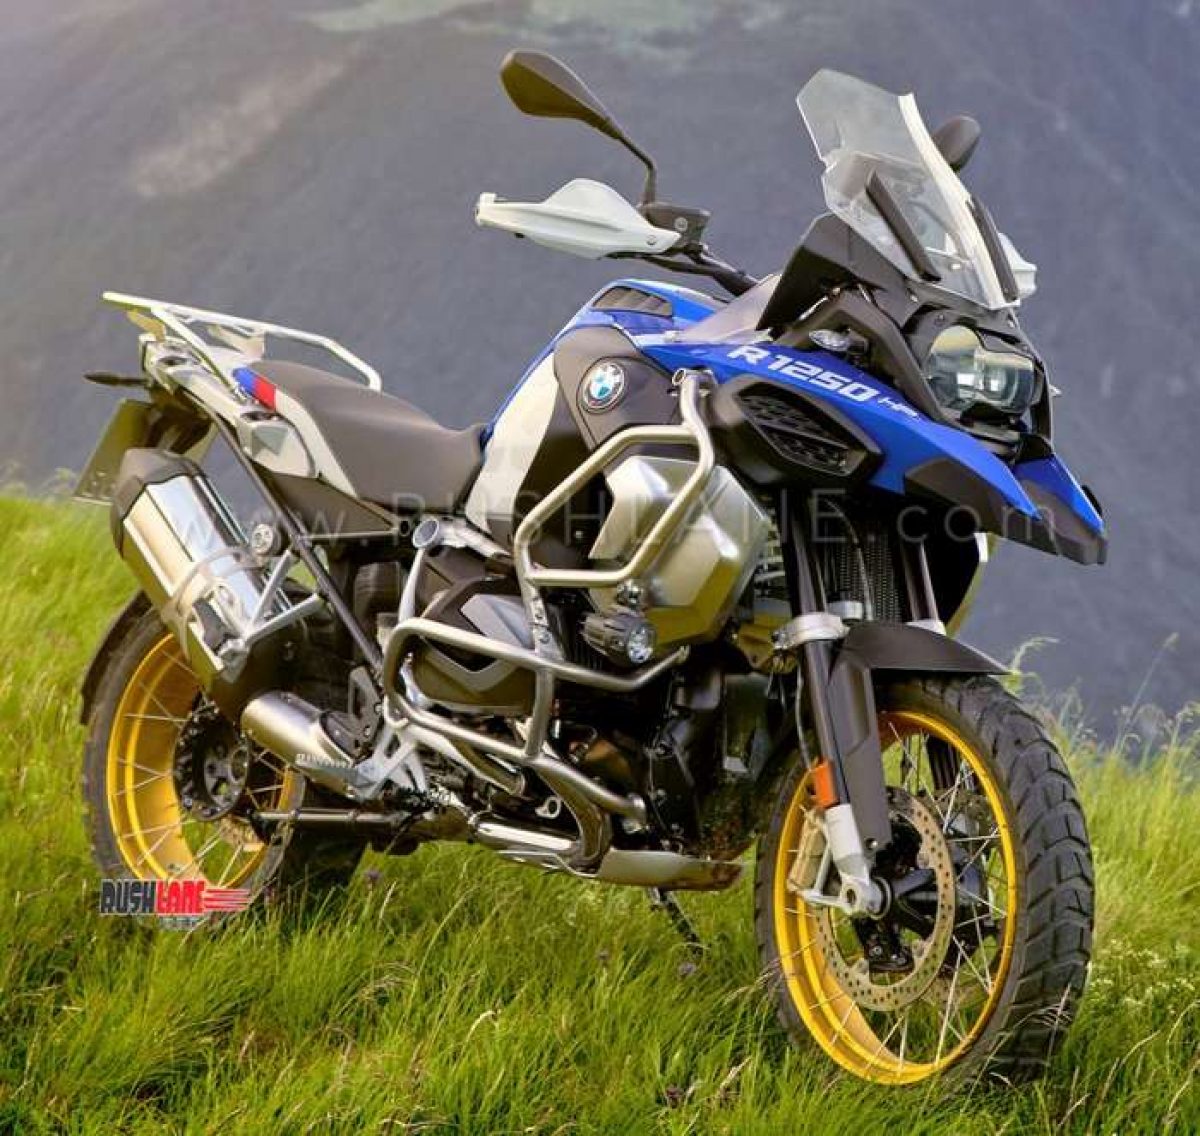 2019 BMW R1250 GS India launch price Rs 16.85 L - 4 variants on offer